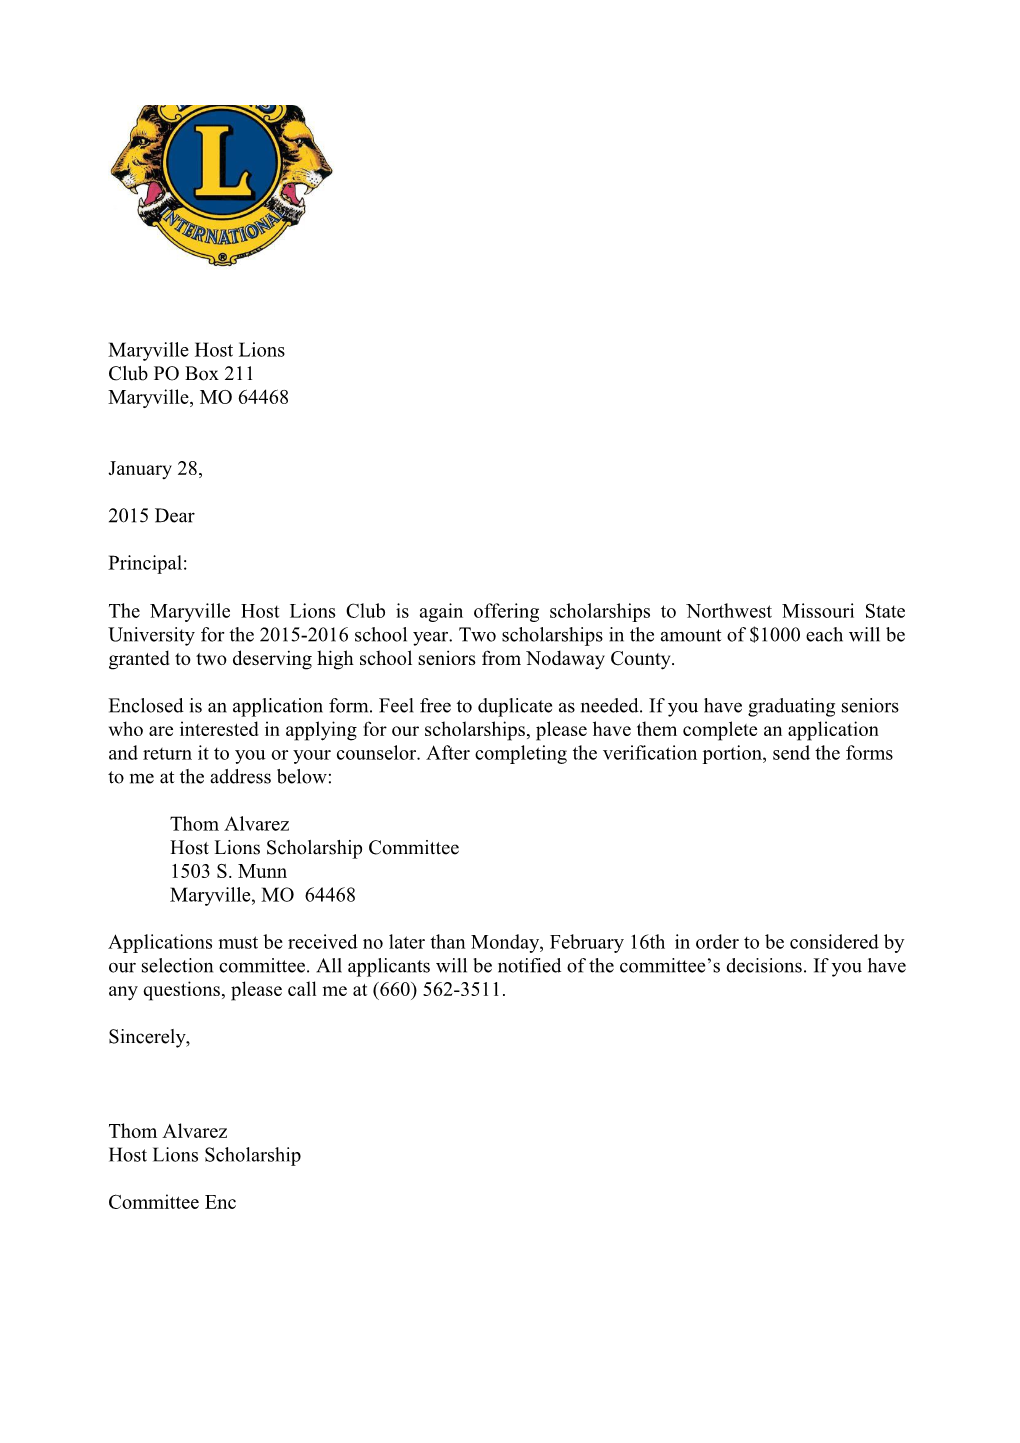 Application for Maryville Host Lions Club Scholarship